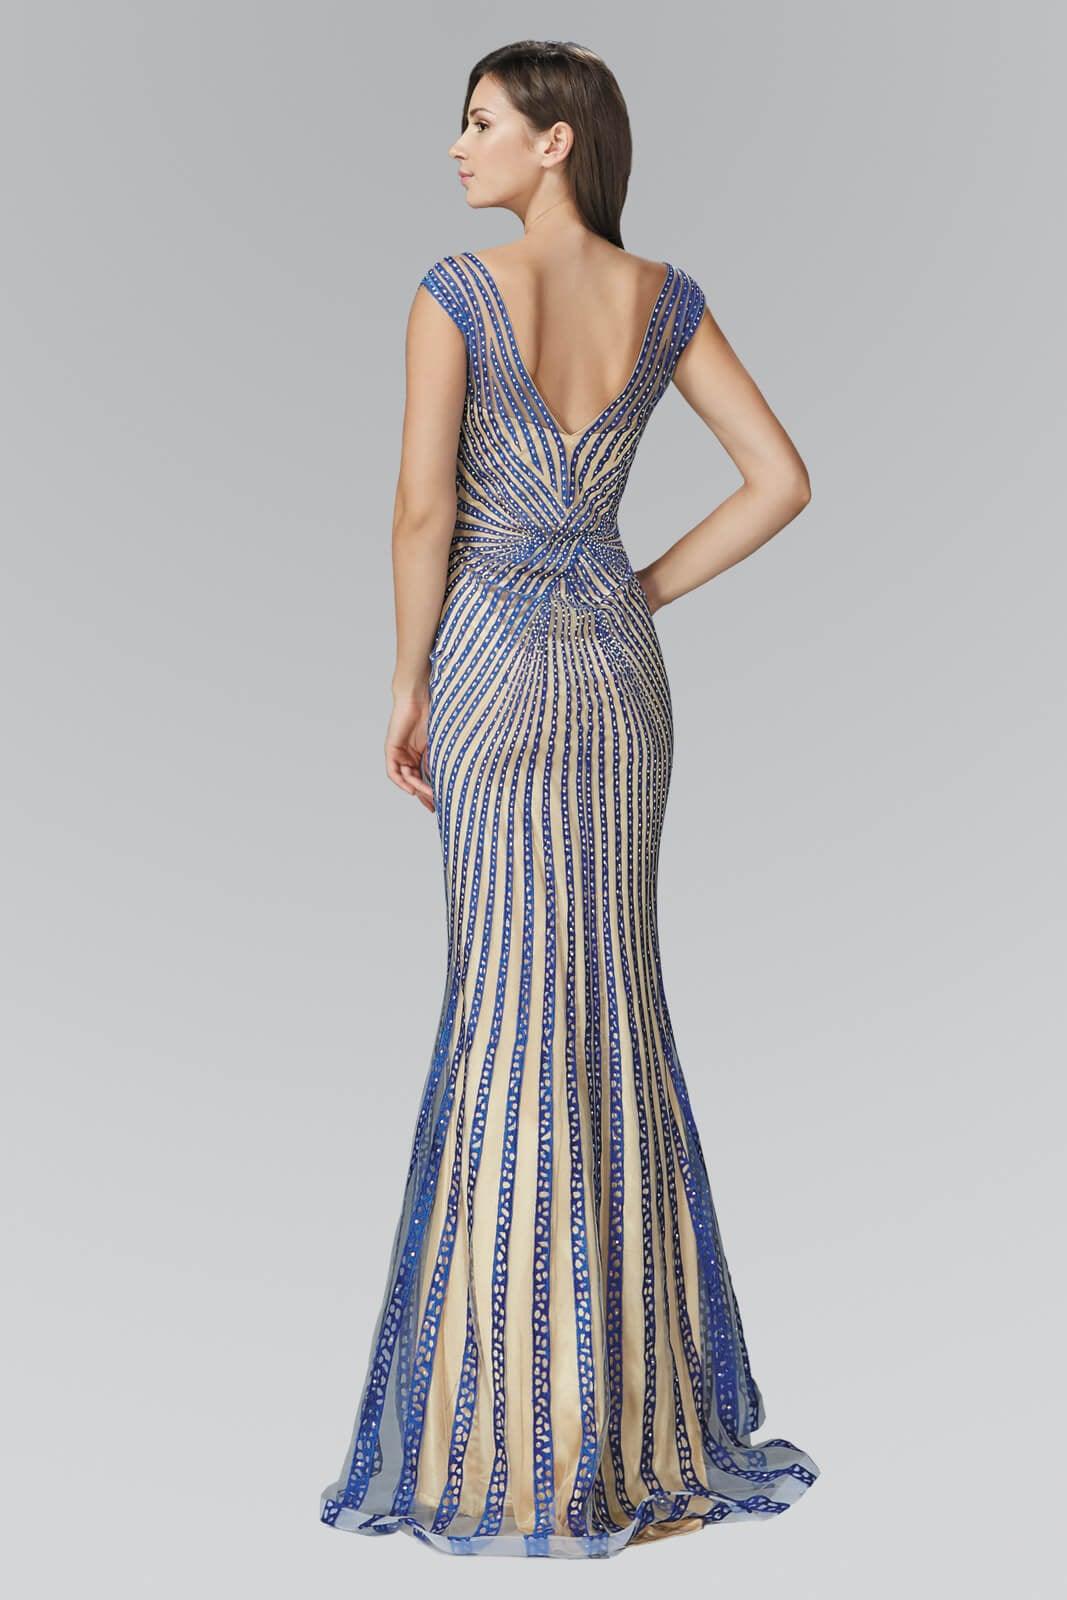 Prom Formal Beaded Dress Evening Gown Sale - The Dress Outlet